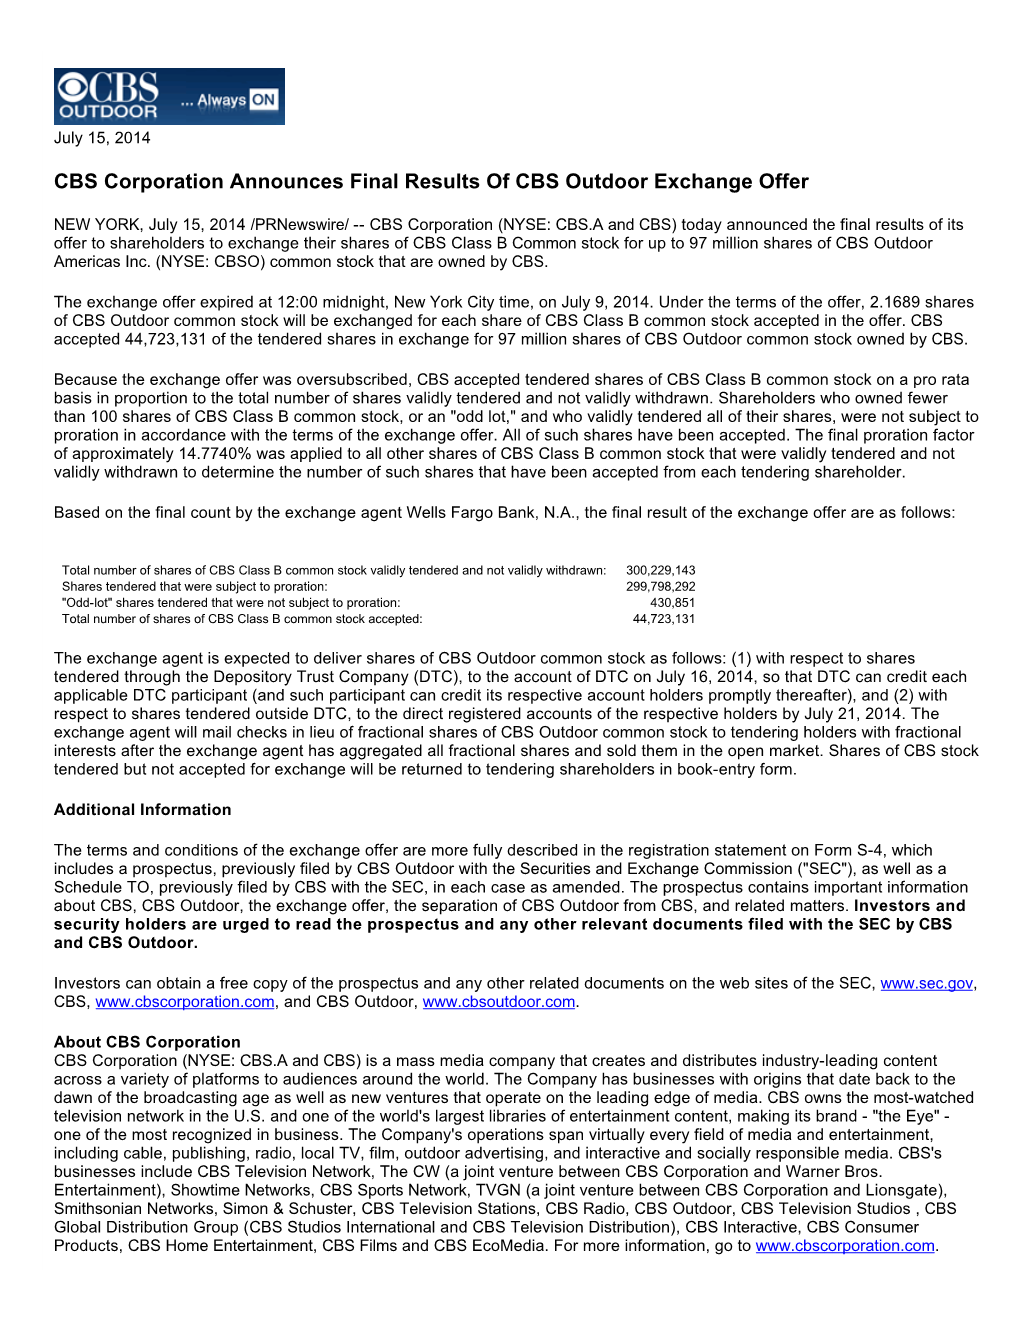 CBS Corporation Announces Final Results of CBS Outdoor Exchange Offer